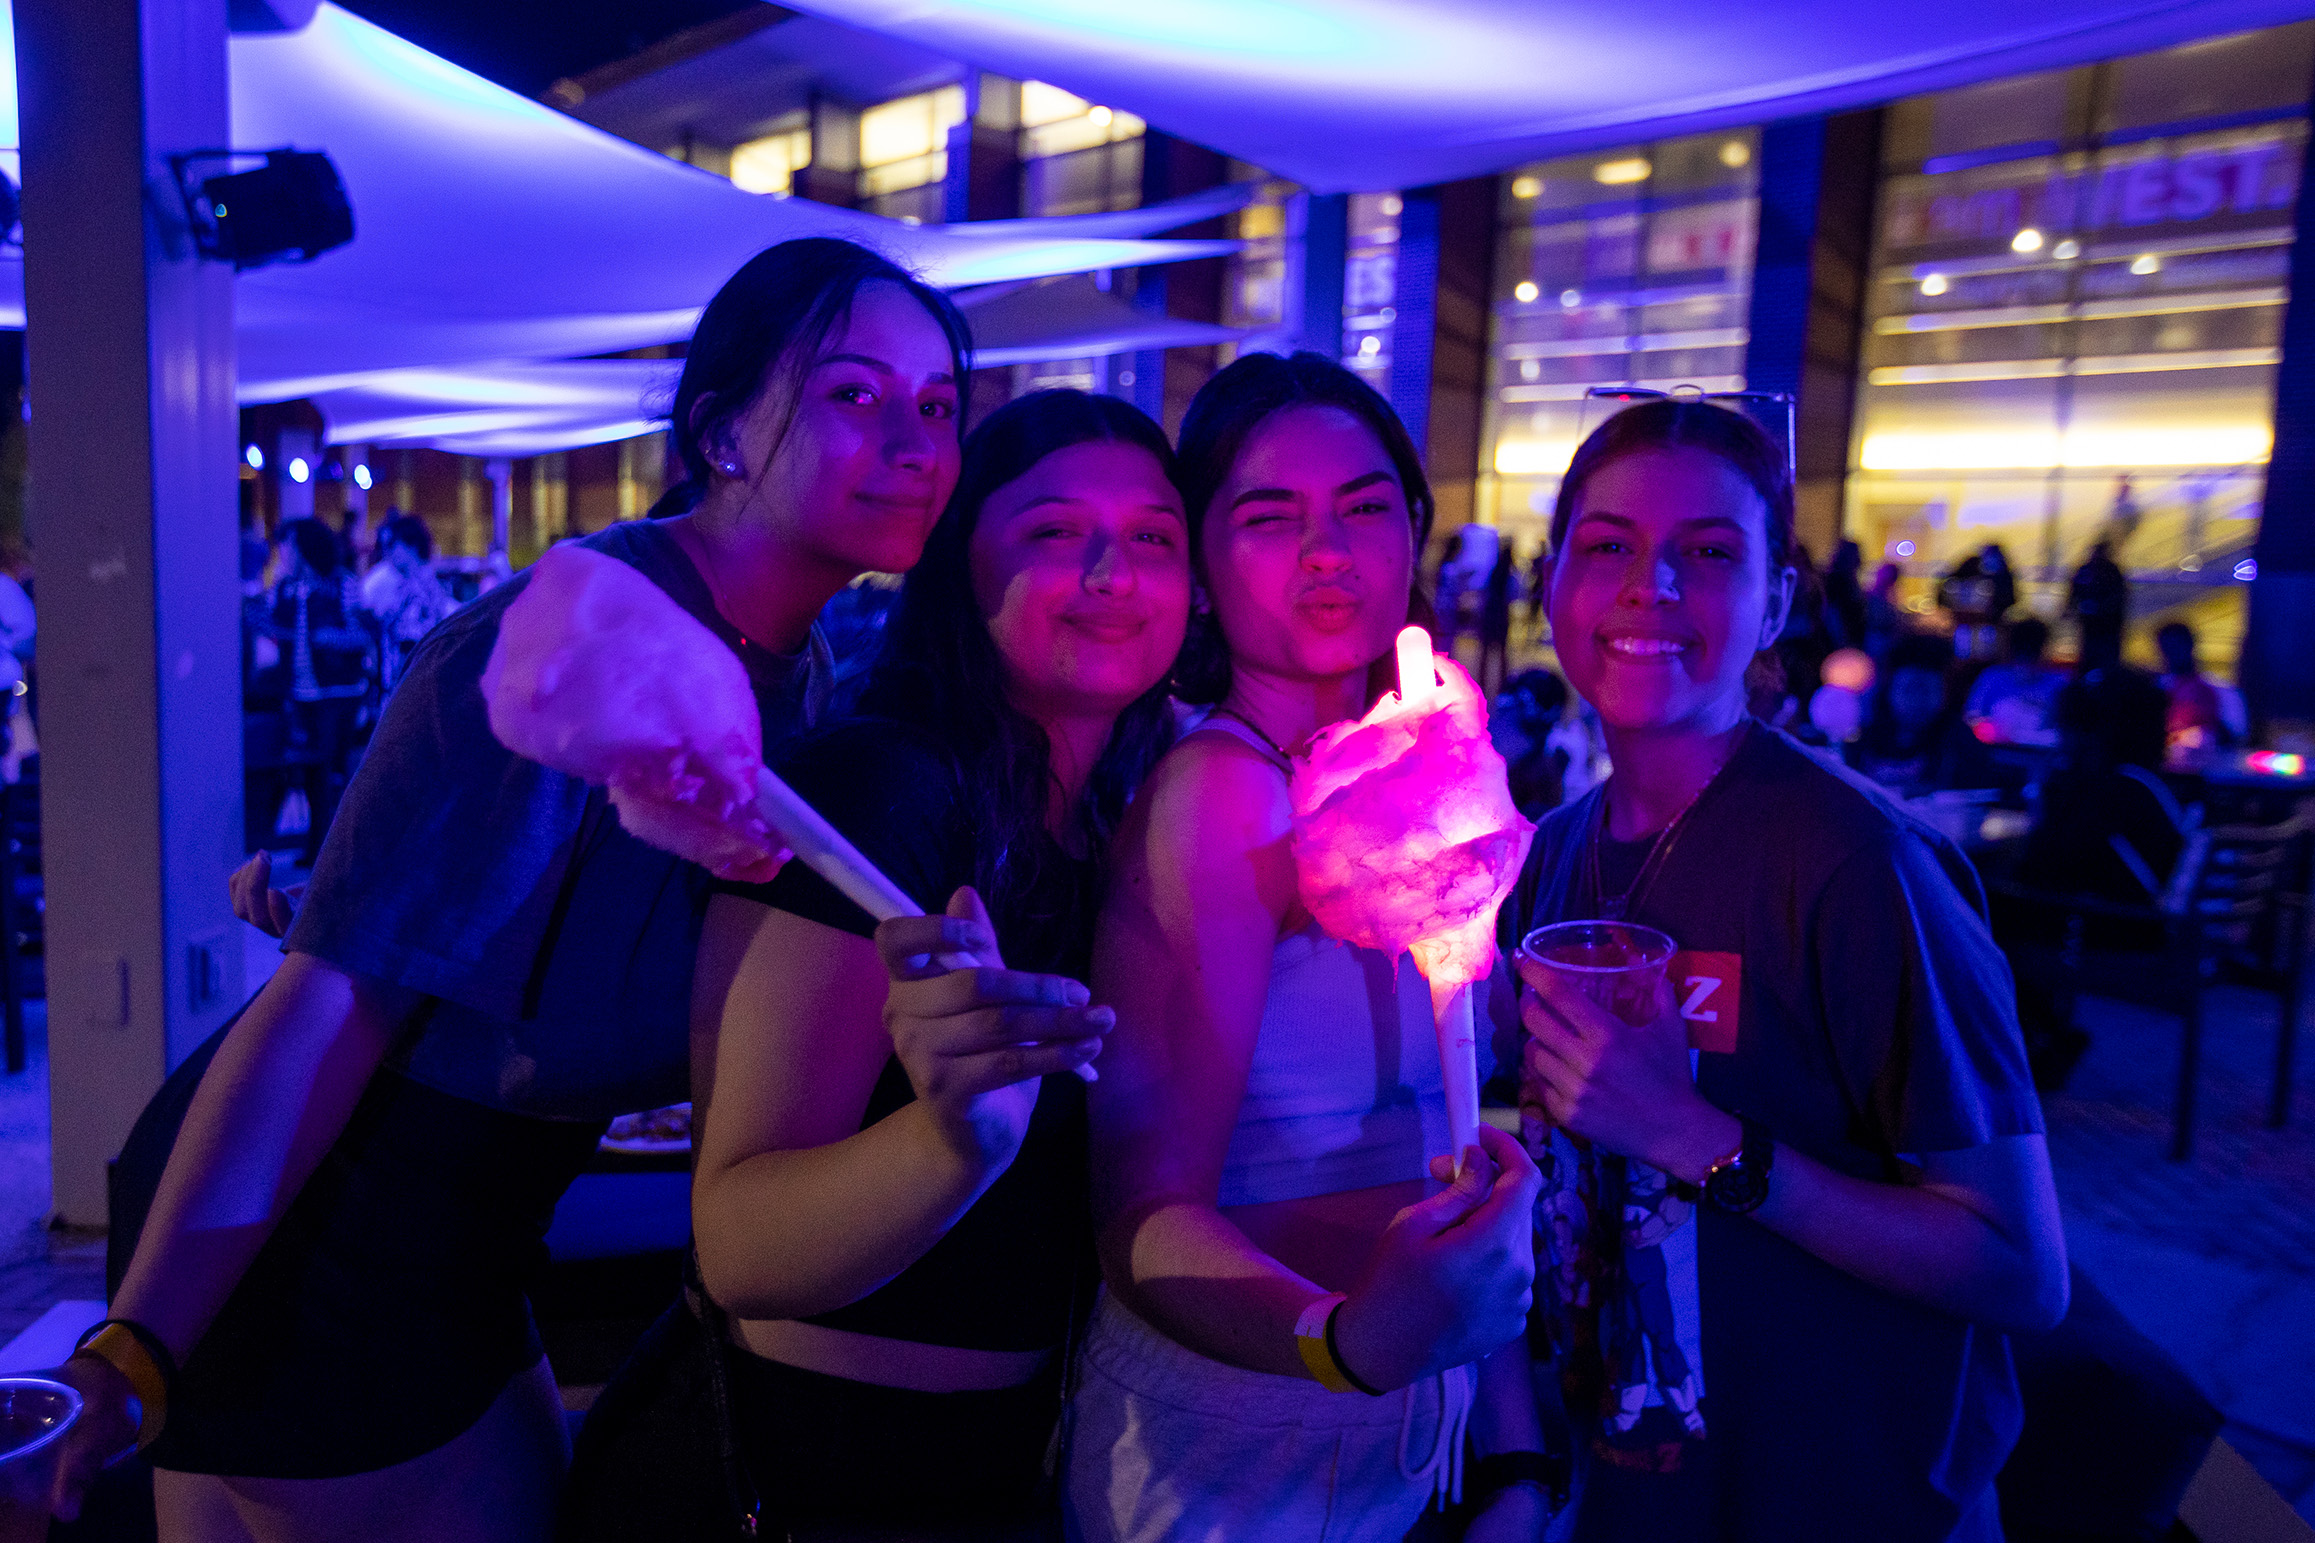 Students eating cotton candy at an event